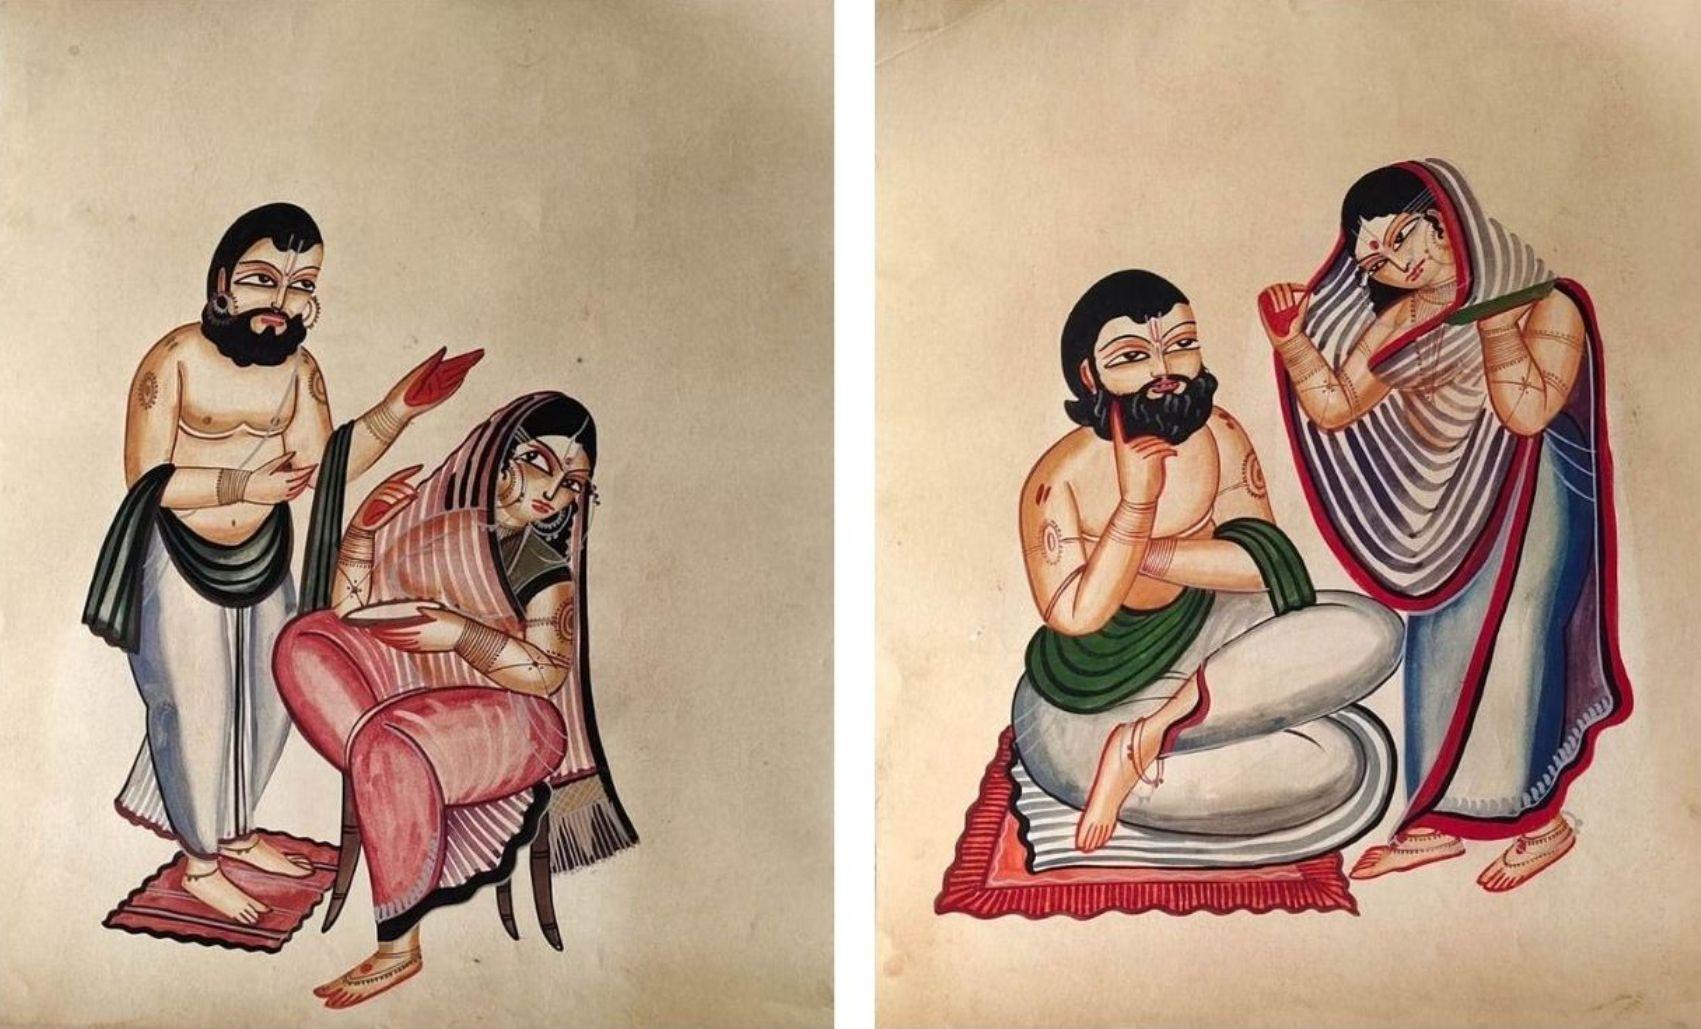 Old Kalighat Pat Paintings, Gouache on Paper (Set of 2 works) by Modern Artist - Mixed Media Art by Jogen Chowdhury 